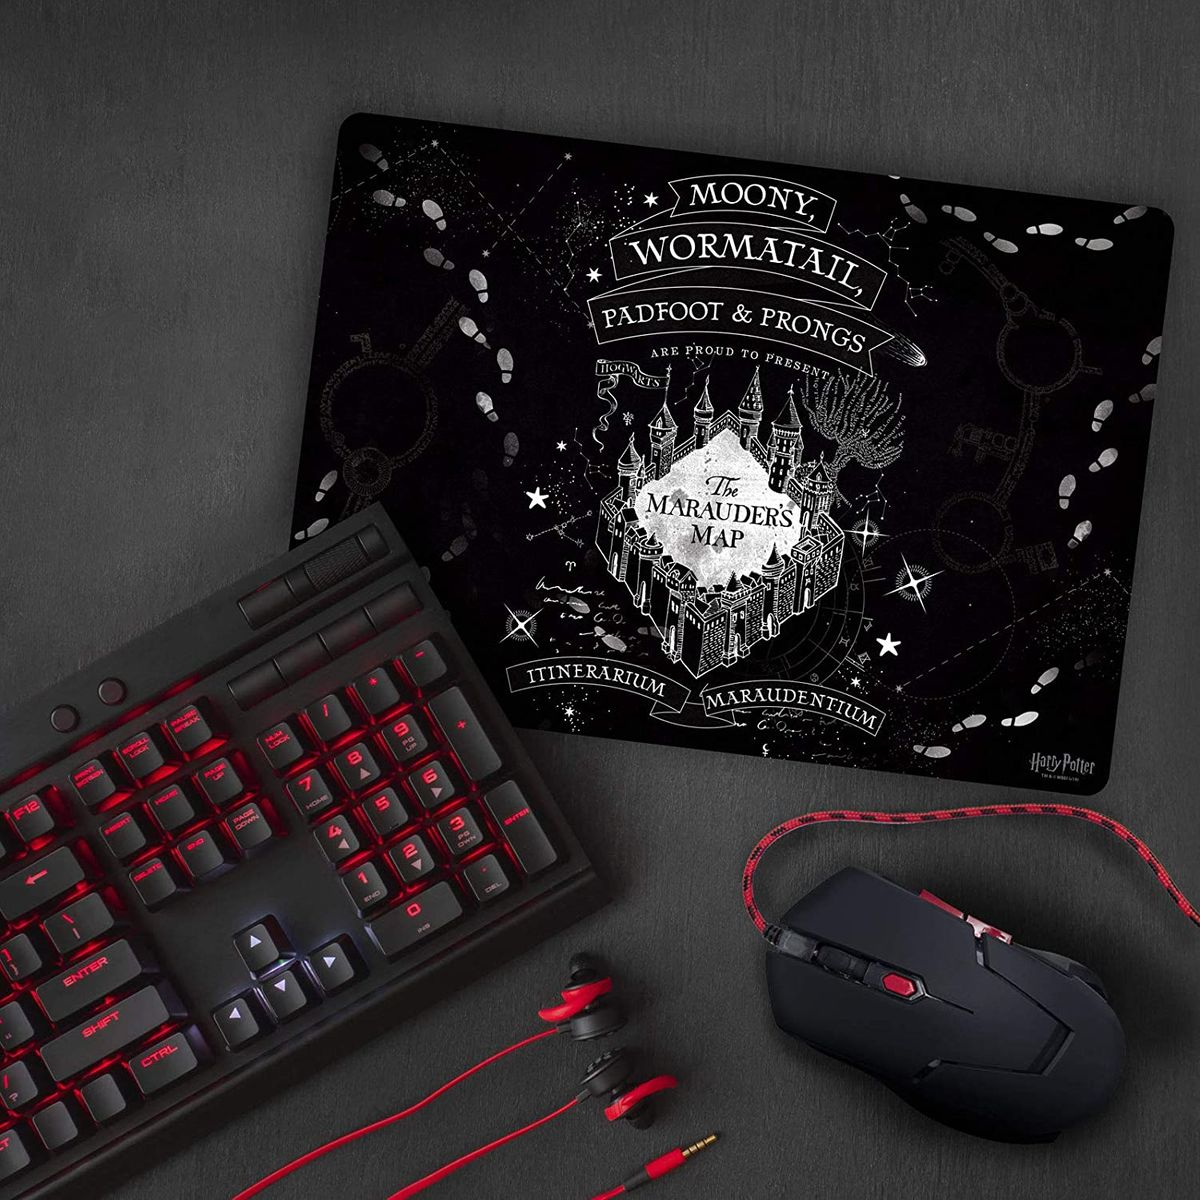 des x Gaming Potter mm) ABYSTYLE 0 (0 Rumtreibers Harry mm Karte Mousepad